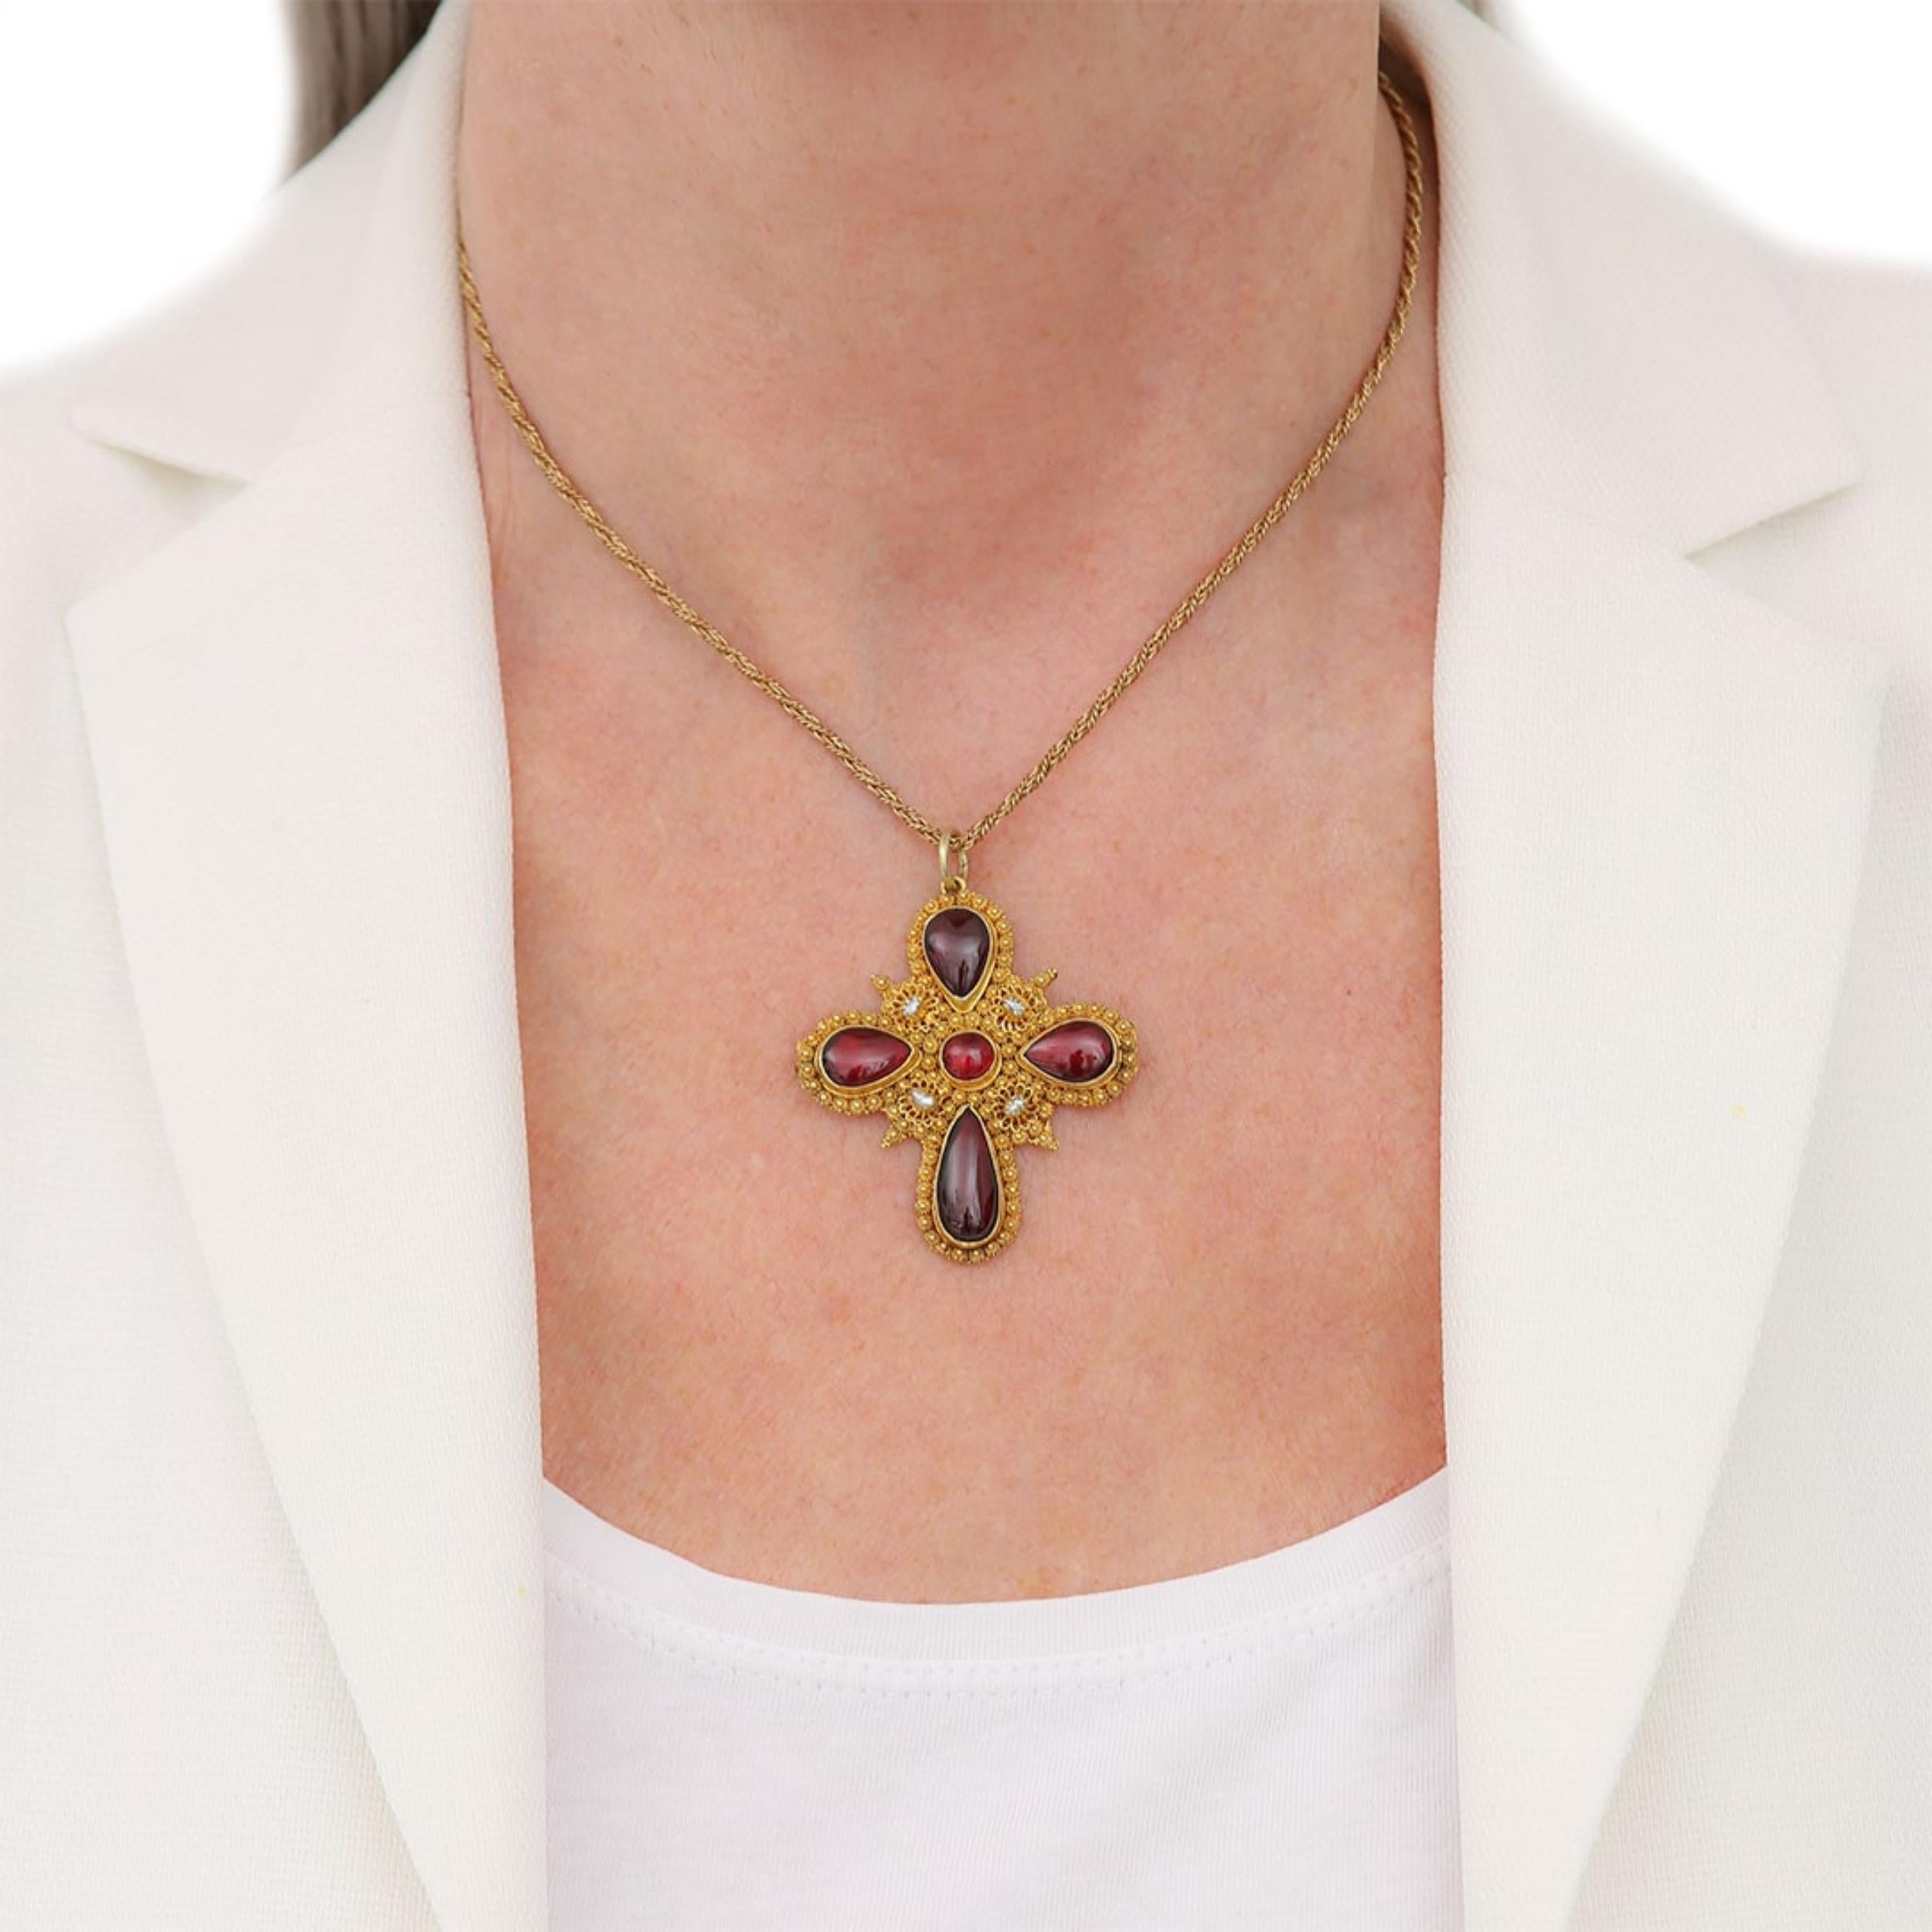 A fine and impressive Georgian 18ct yellow gold garnet cabochon or carbuncle and natural pearl cross dating from circa 1820. The beautifully crafted cannetille work making up the majority of the body of the cross with the deep, pigeon blood red